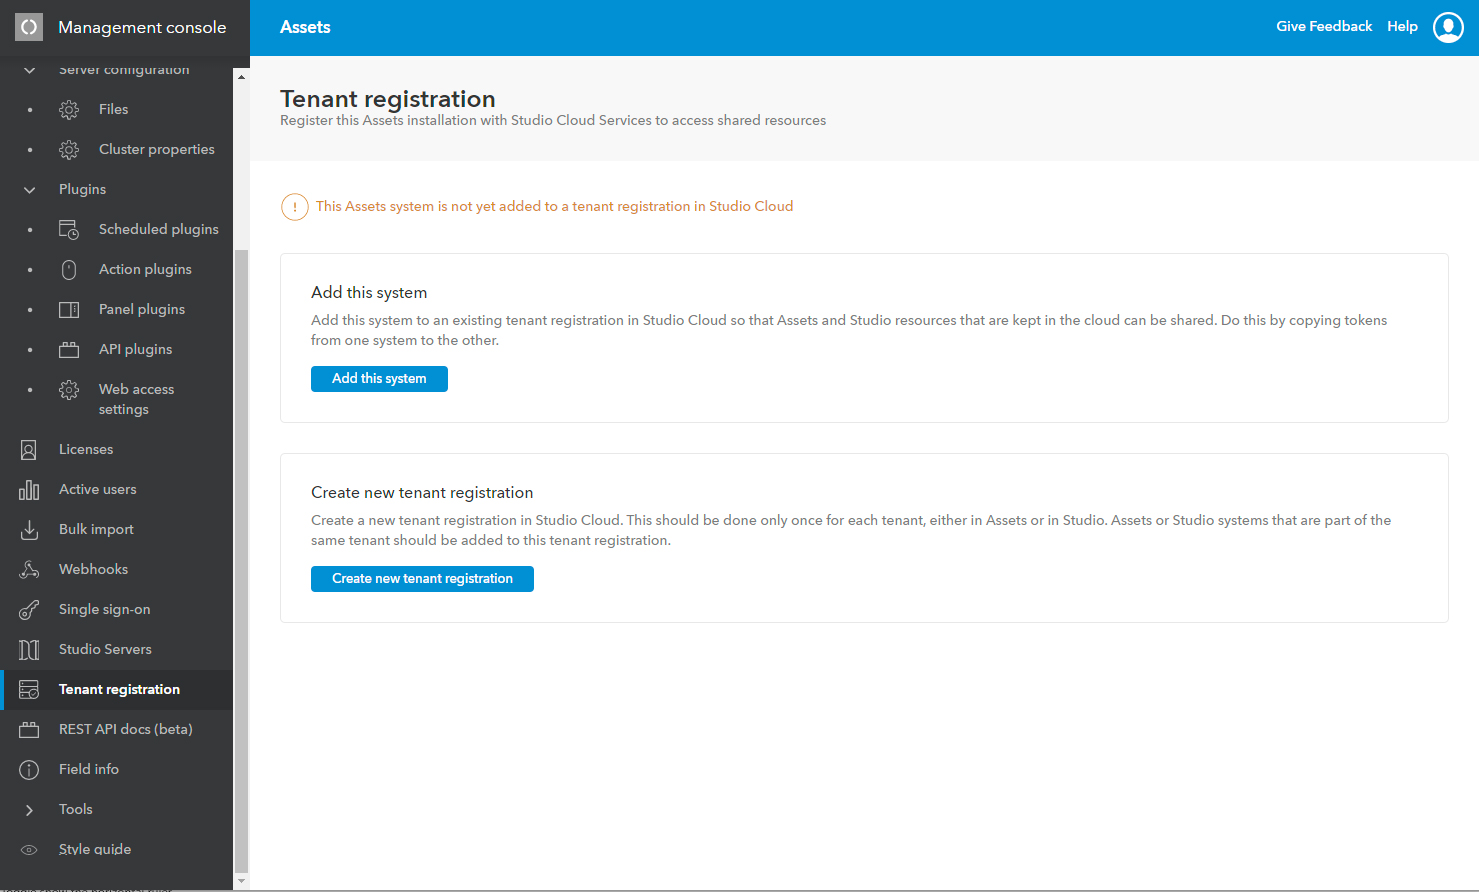 The Tenant registration page in the Management Console of Assets Server